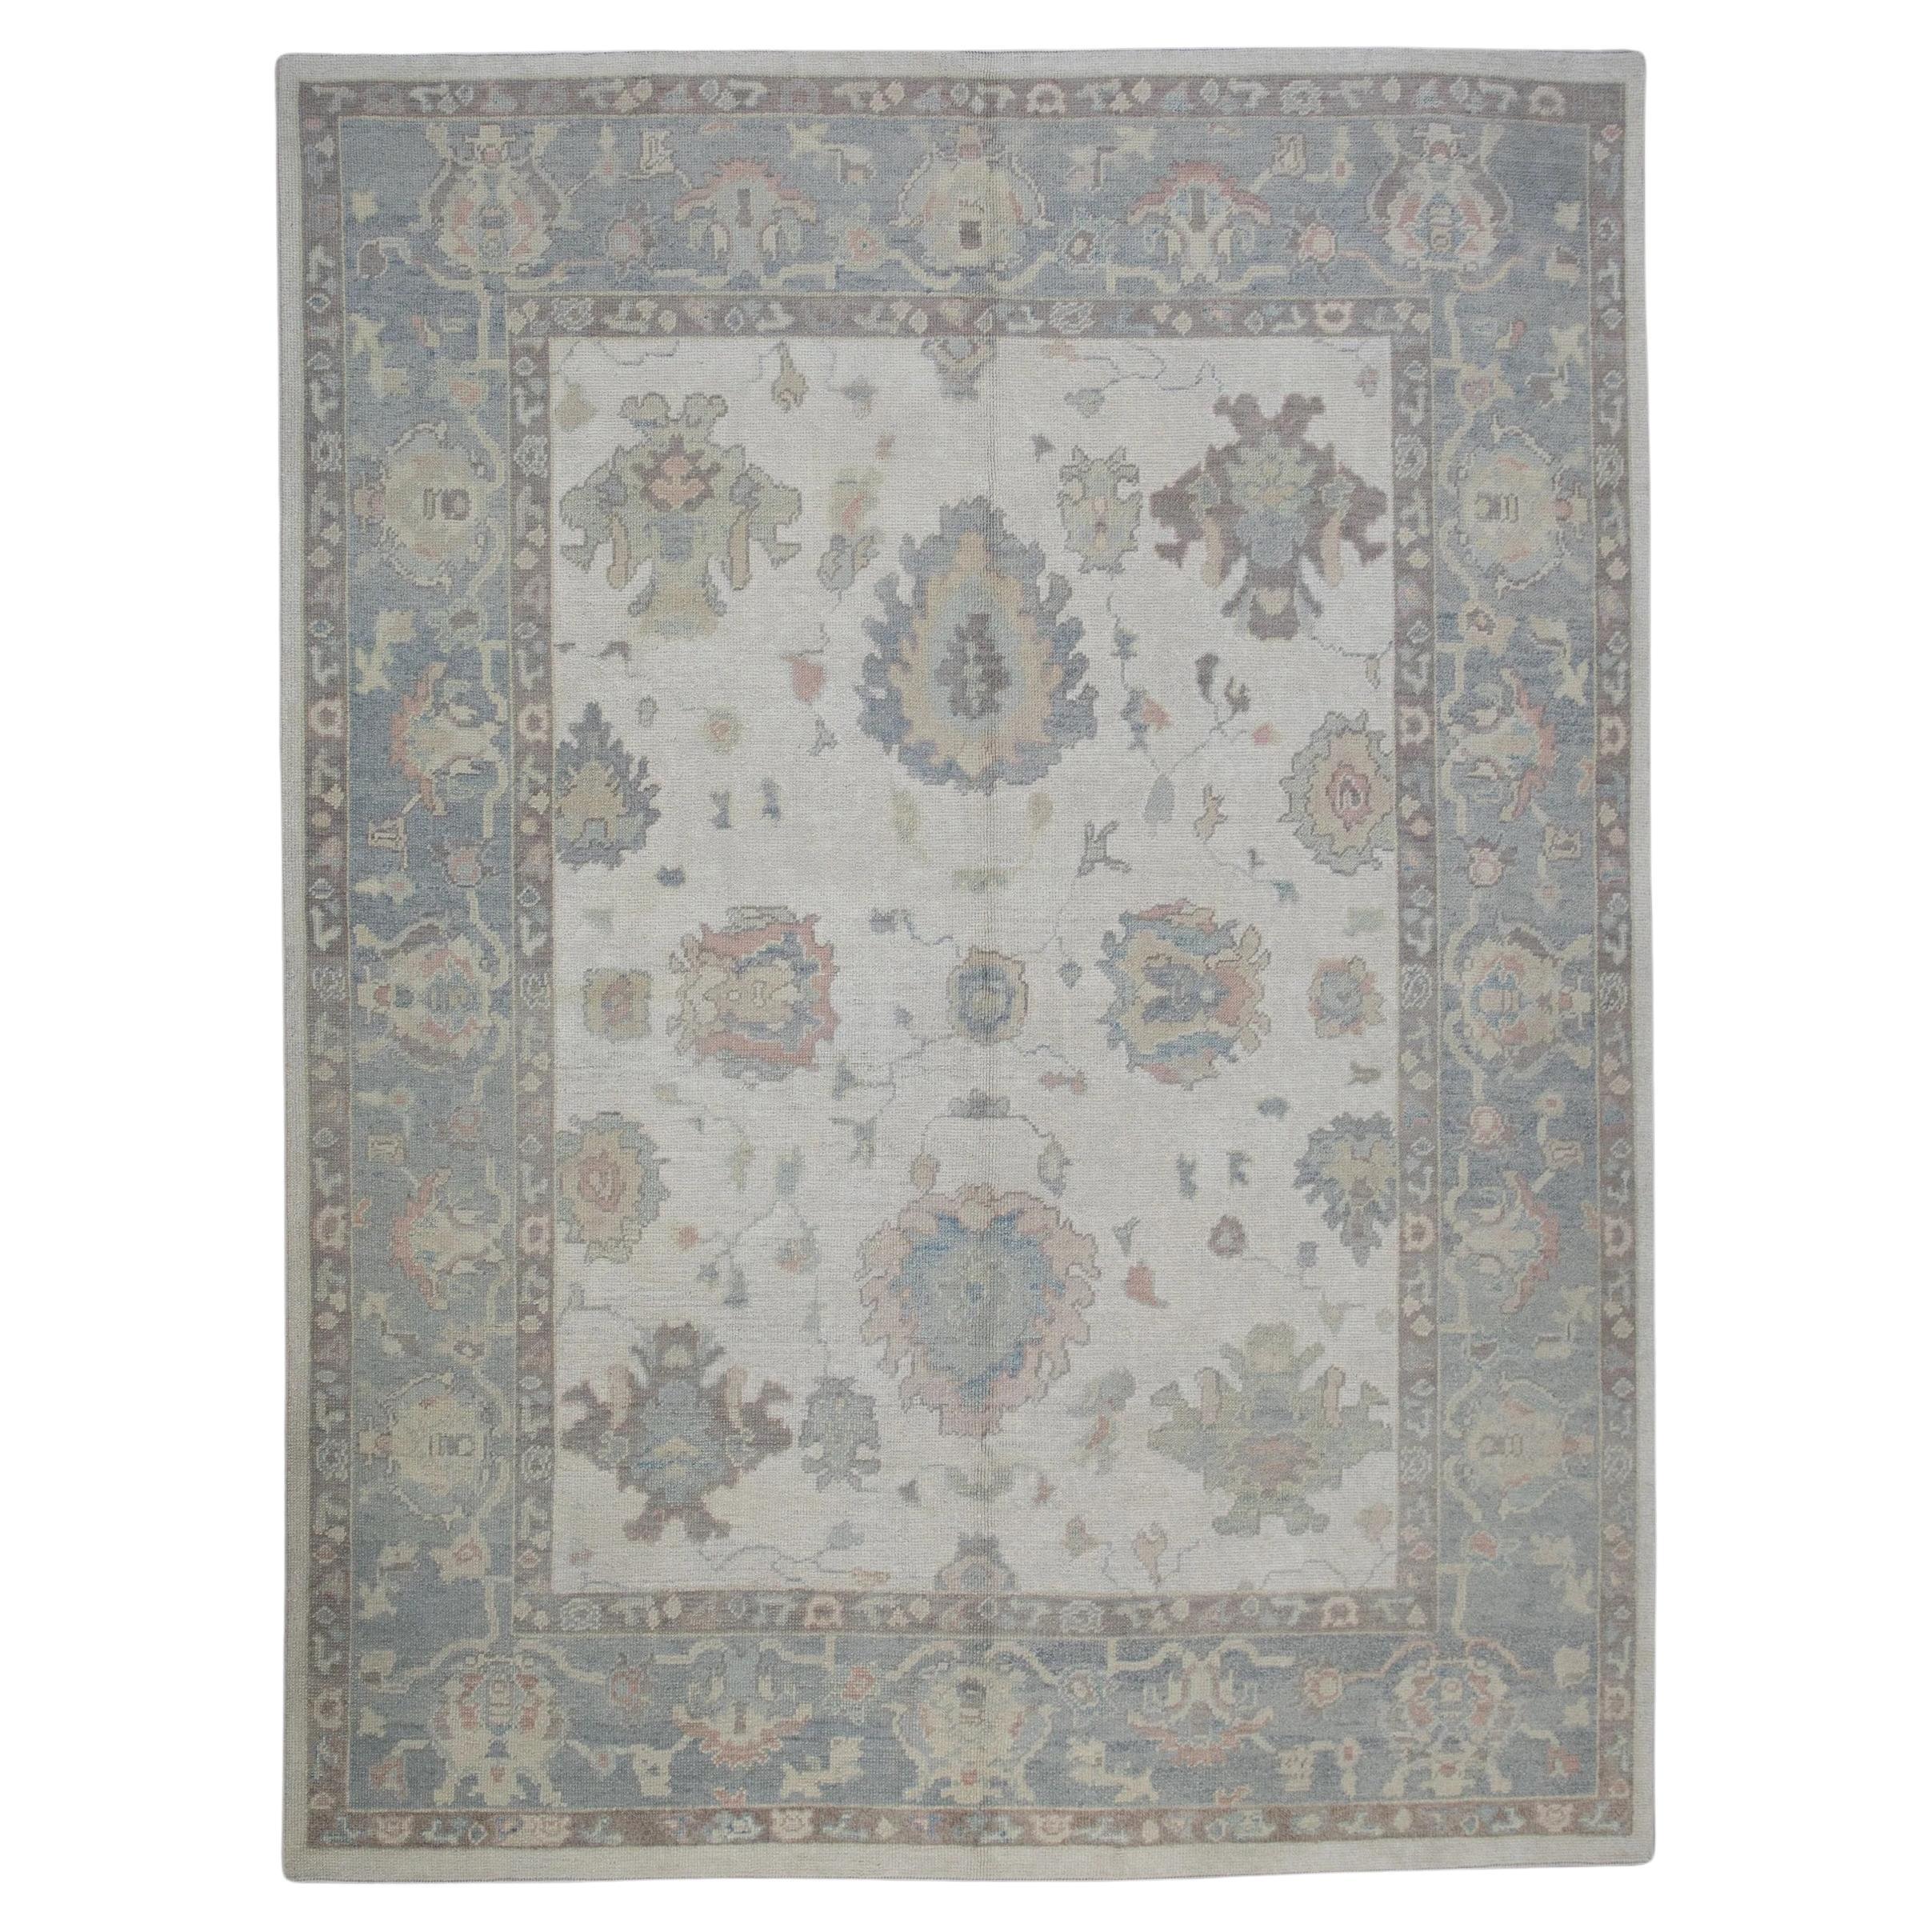 Handwoven Wool Turkish Oushak Rug in Blue Floral Pattern 8'5" x 10'7" For Sale